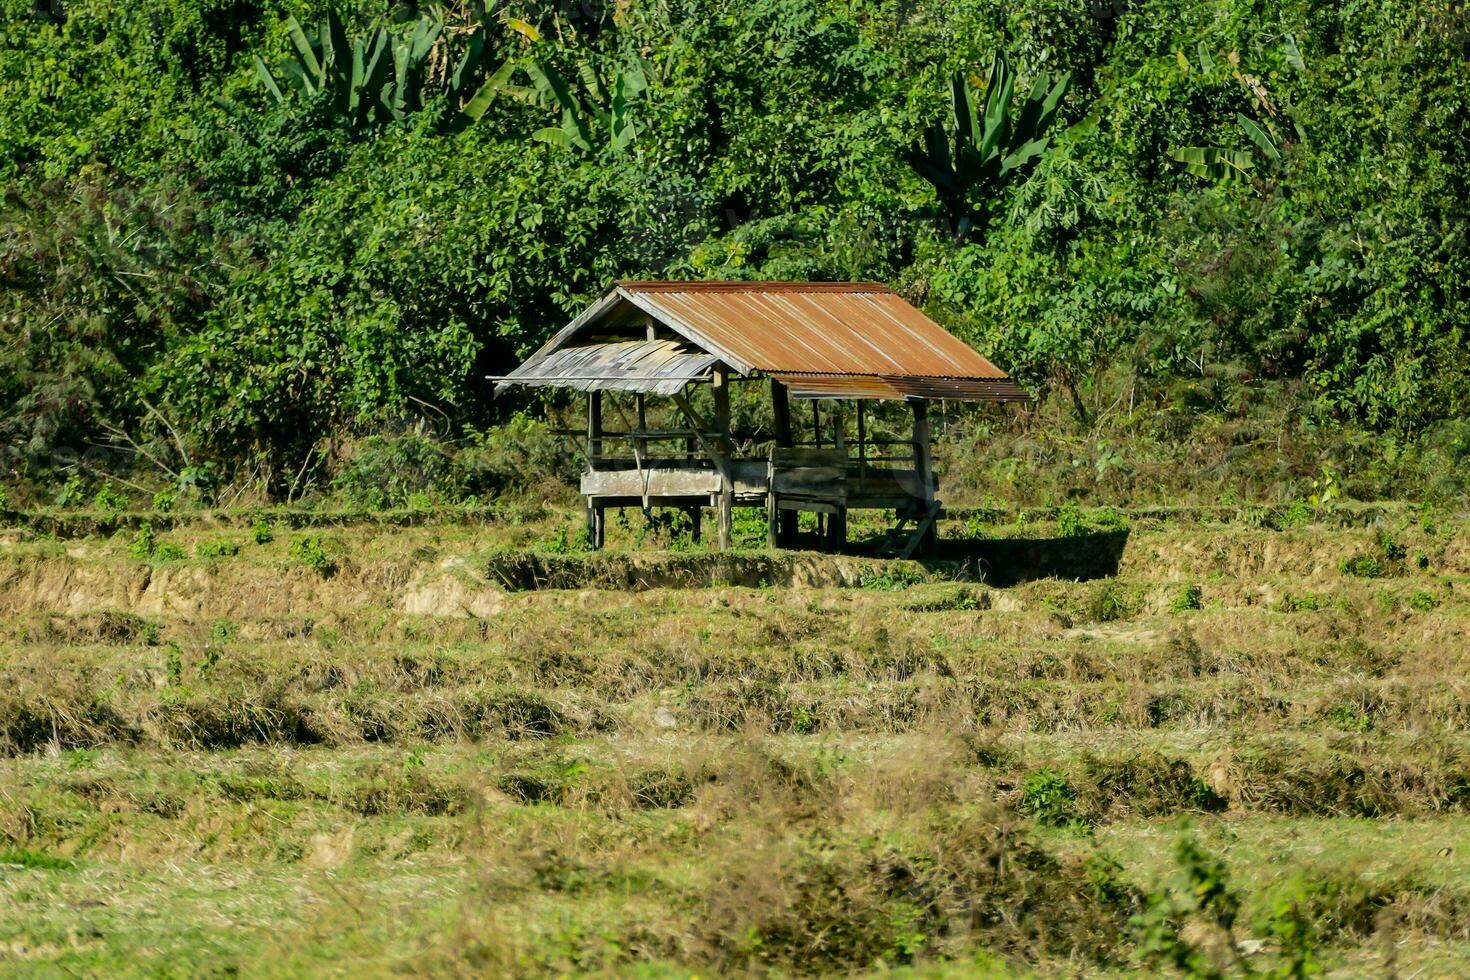 a hut in the middle of a field with trees photo